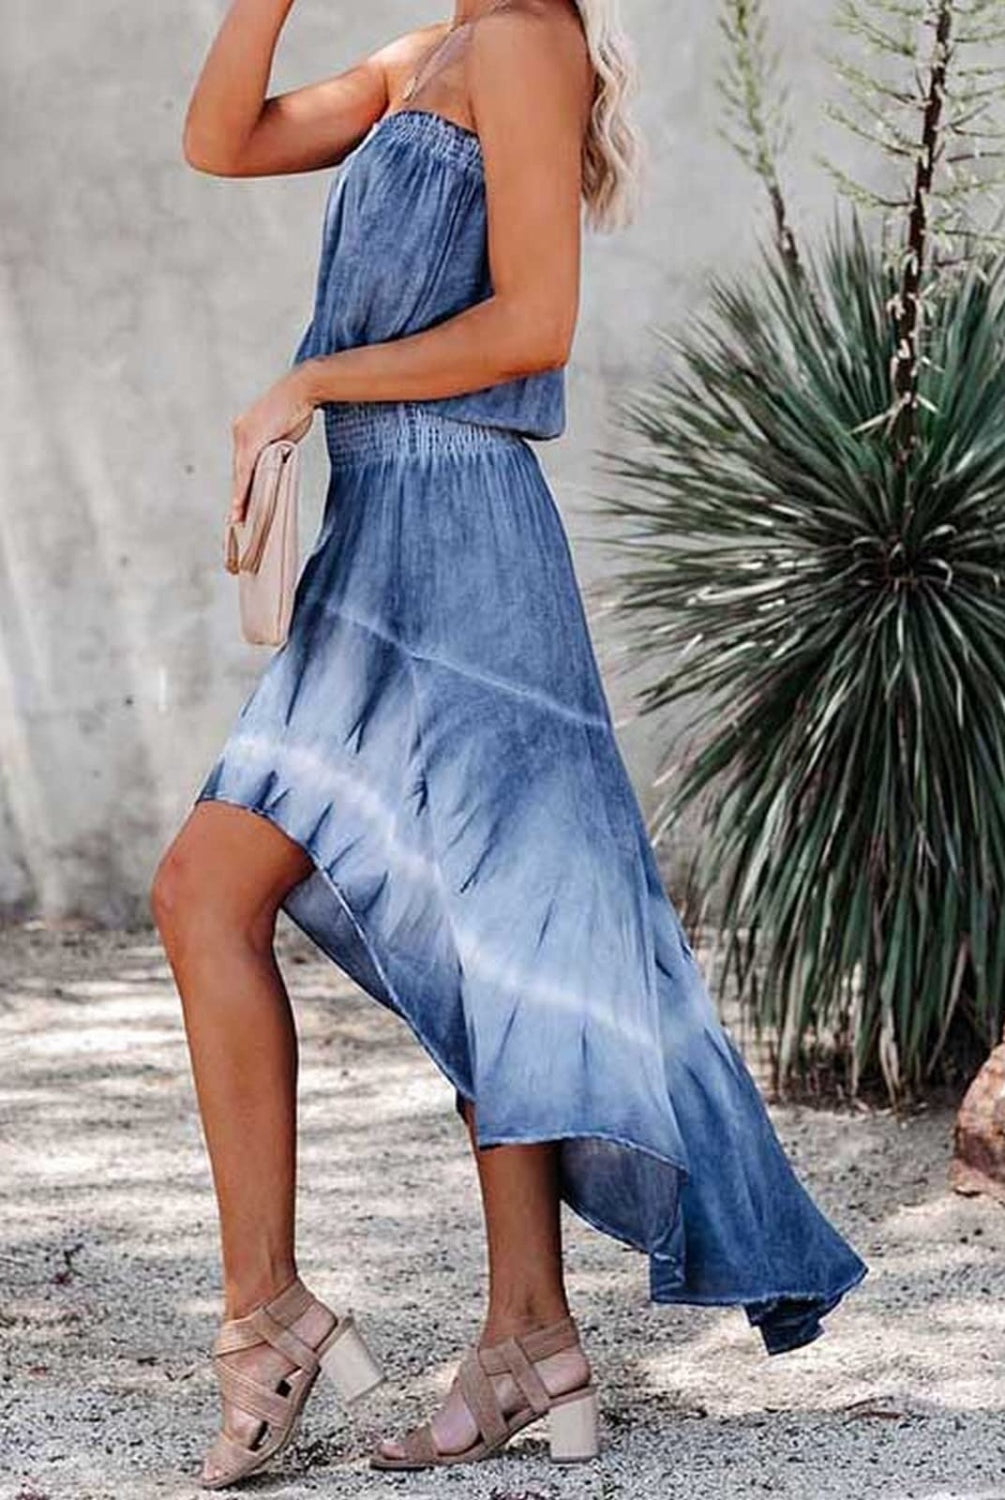 Trendsetting woman in a strapless denim hi-low dress with a stunning tie-dye design, carrying a chic clutch.